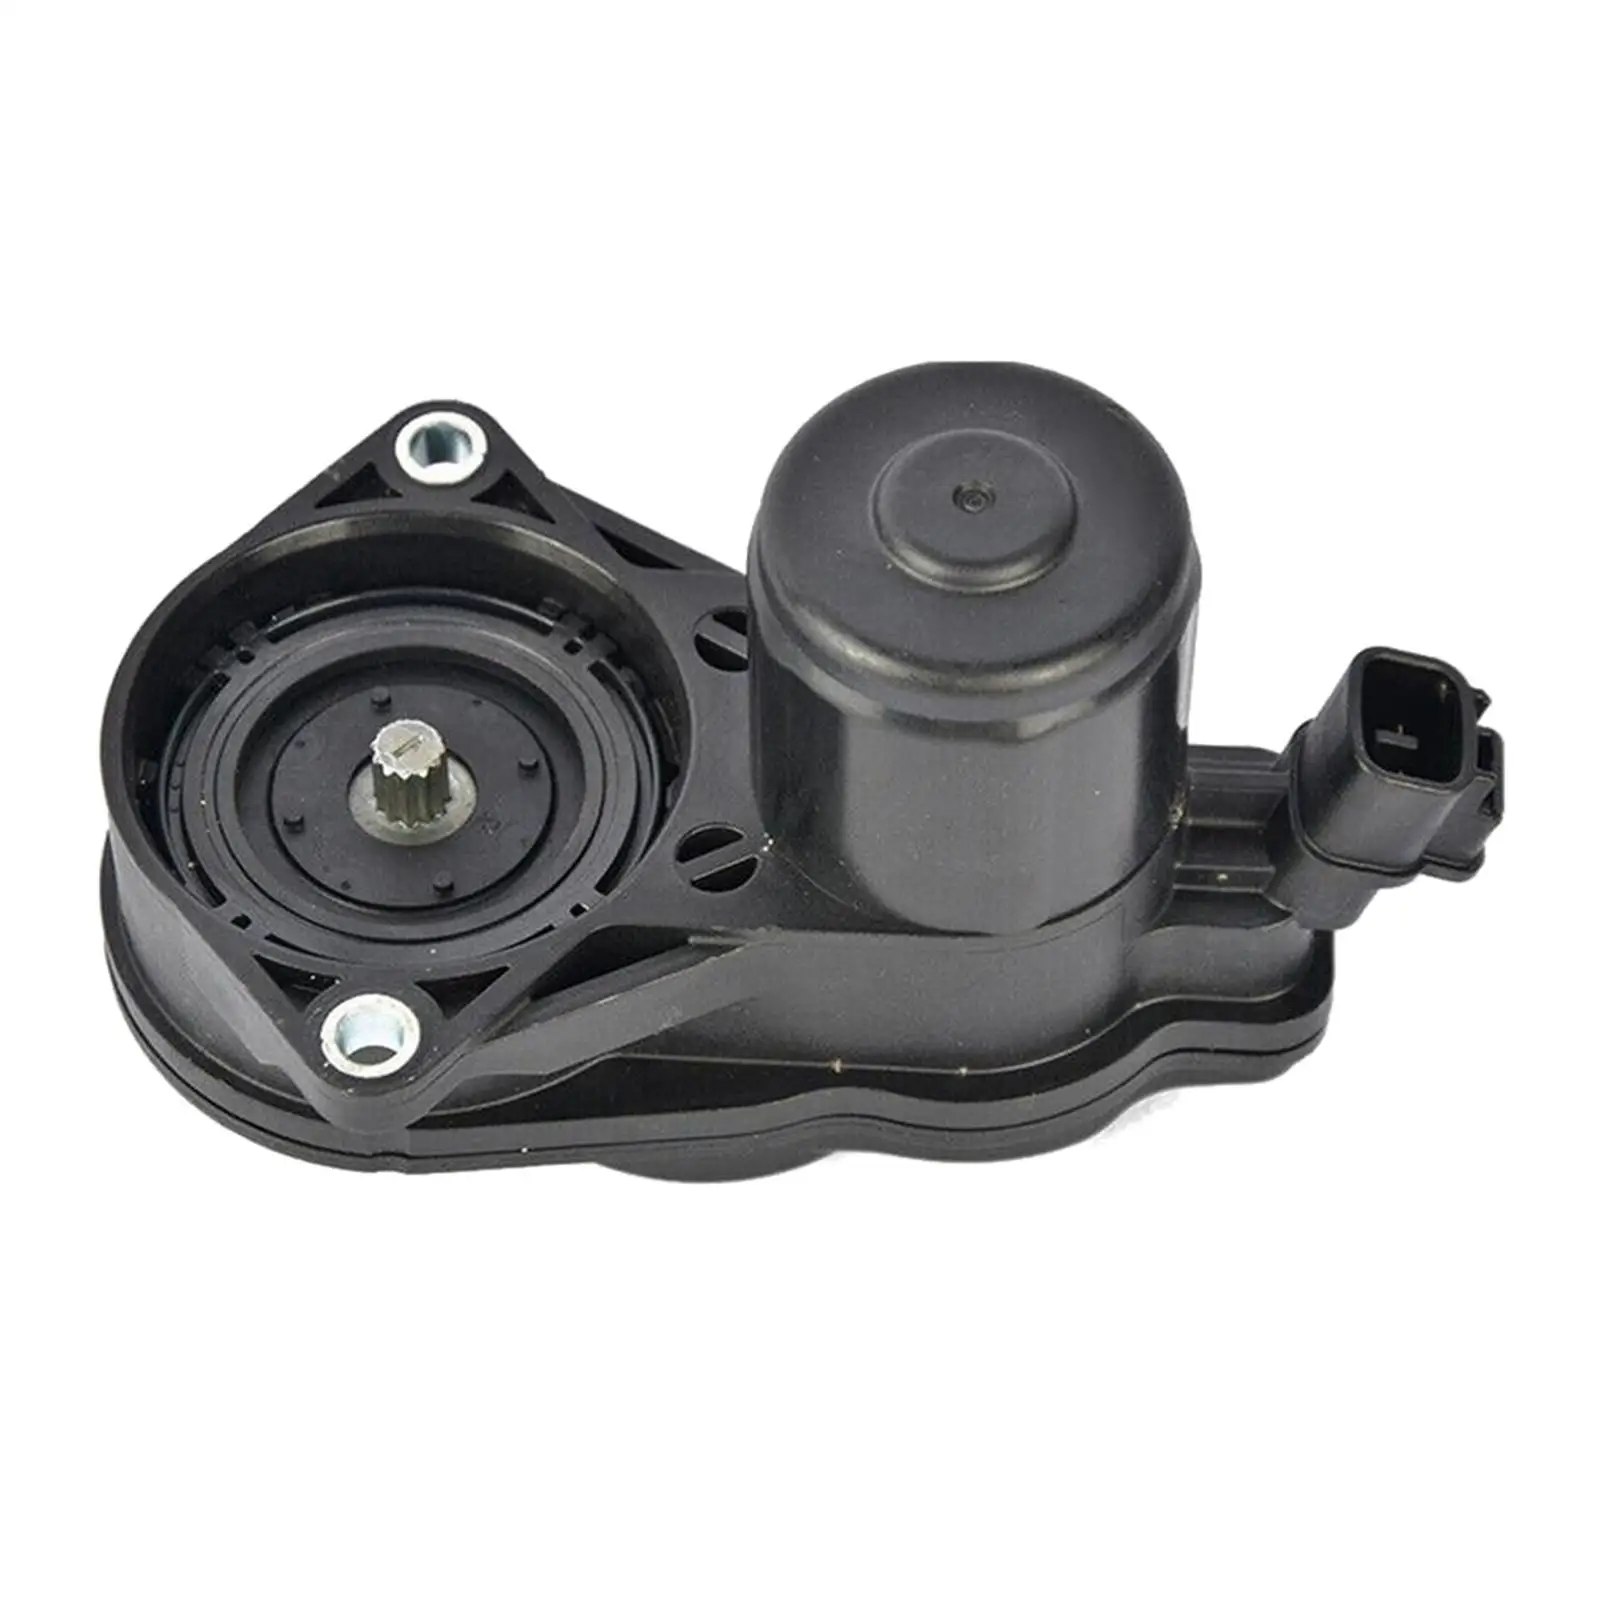 Parking Brake Actuator Replaces Automotive Replacement Part for Toyota for highlander for c-hr Exquisite Workmanship